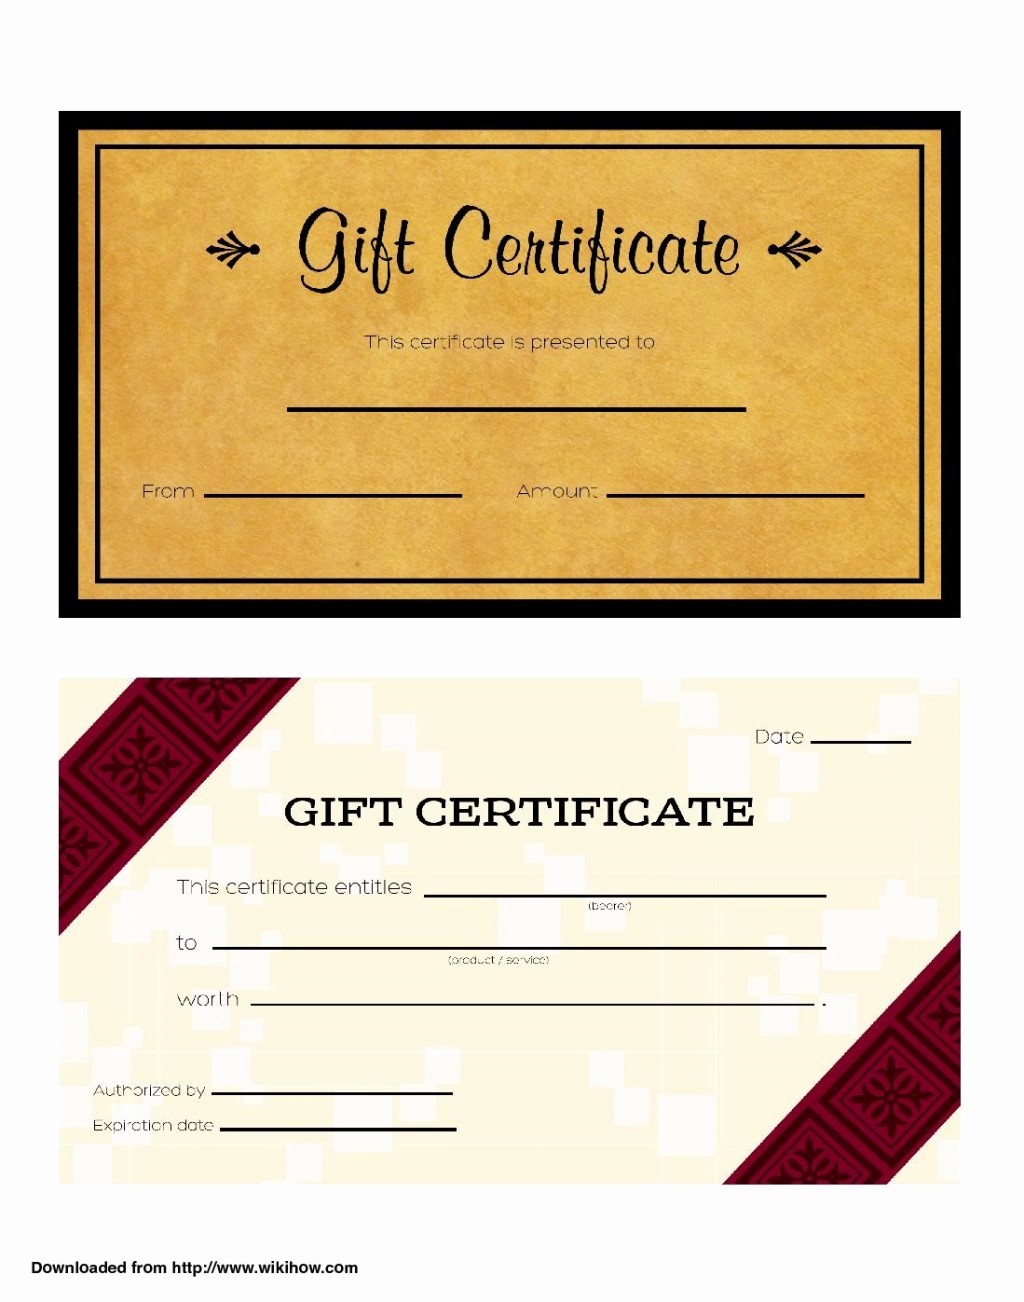 Gift Certificates for Small Business Lovely Cool Design Of Business Gift Certificate Template Brown